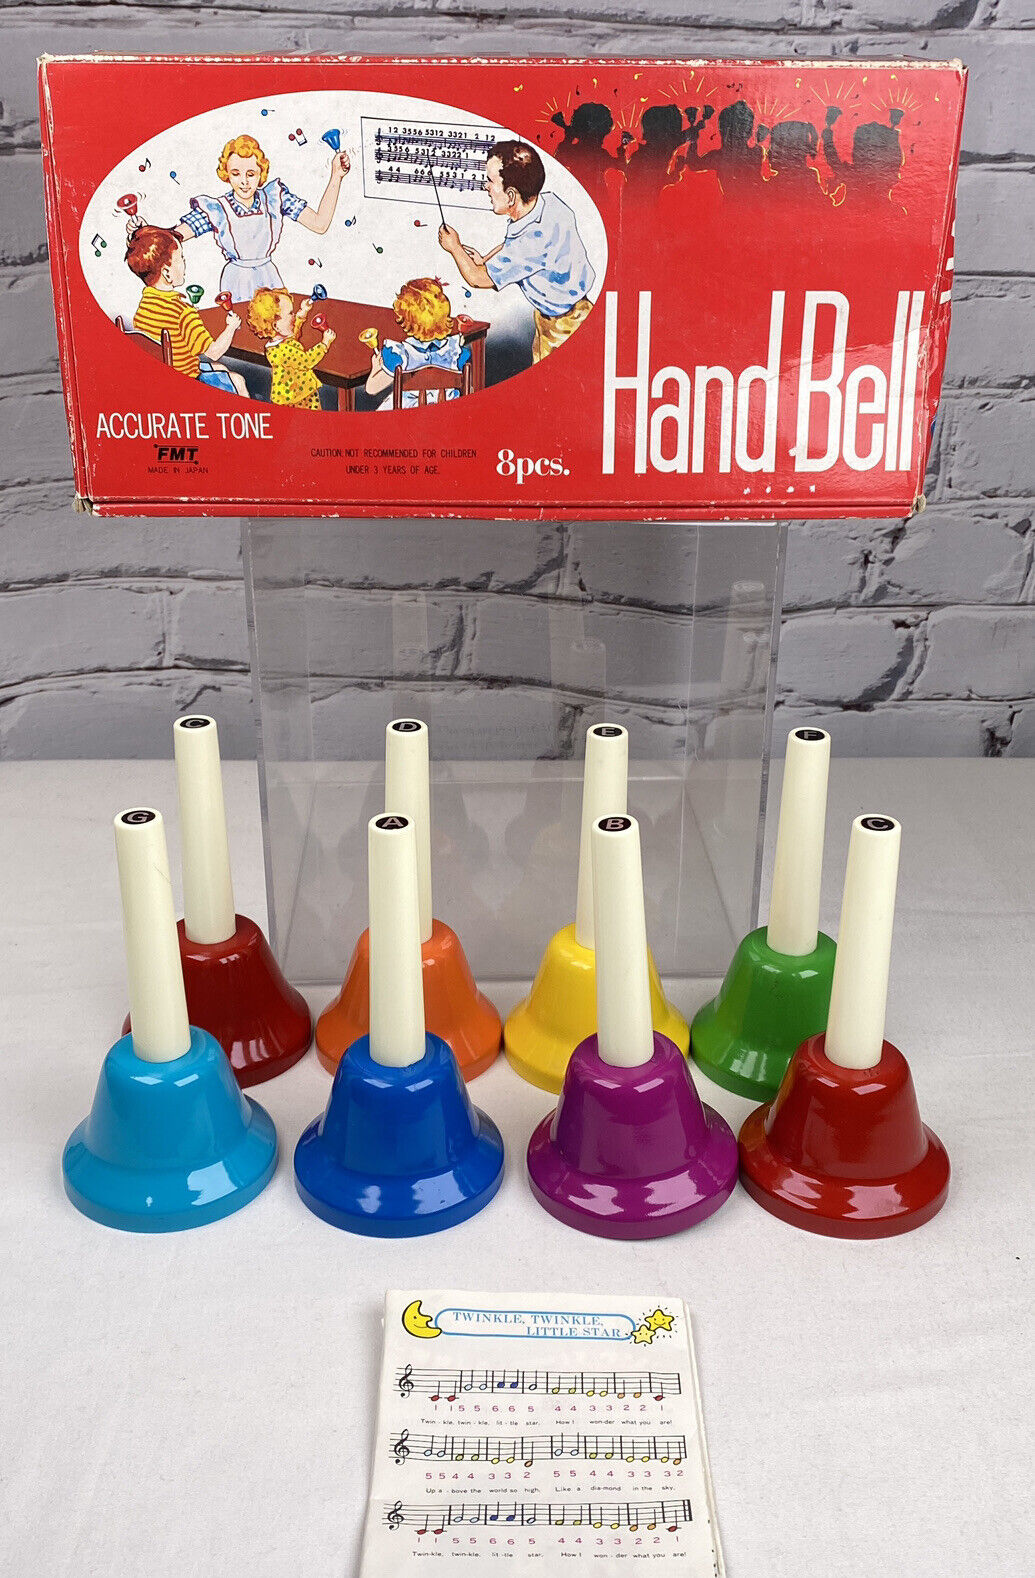 8 Piece Hand Bell Accurate Tone Set By Fmt Japan Original Box Vintage